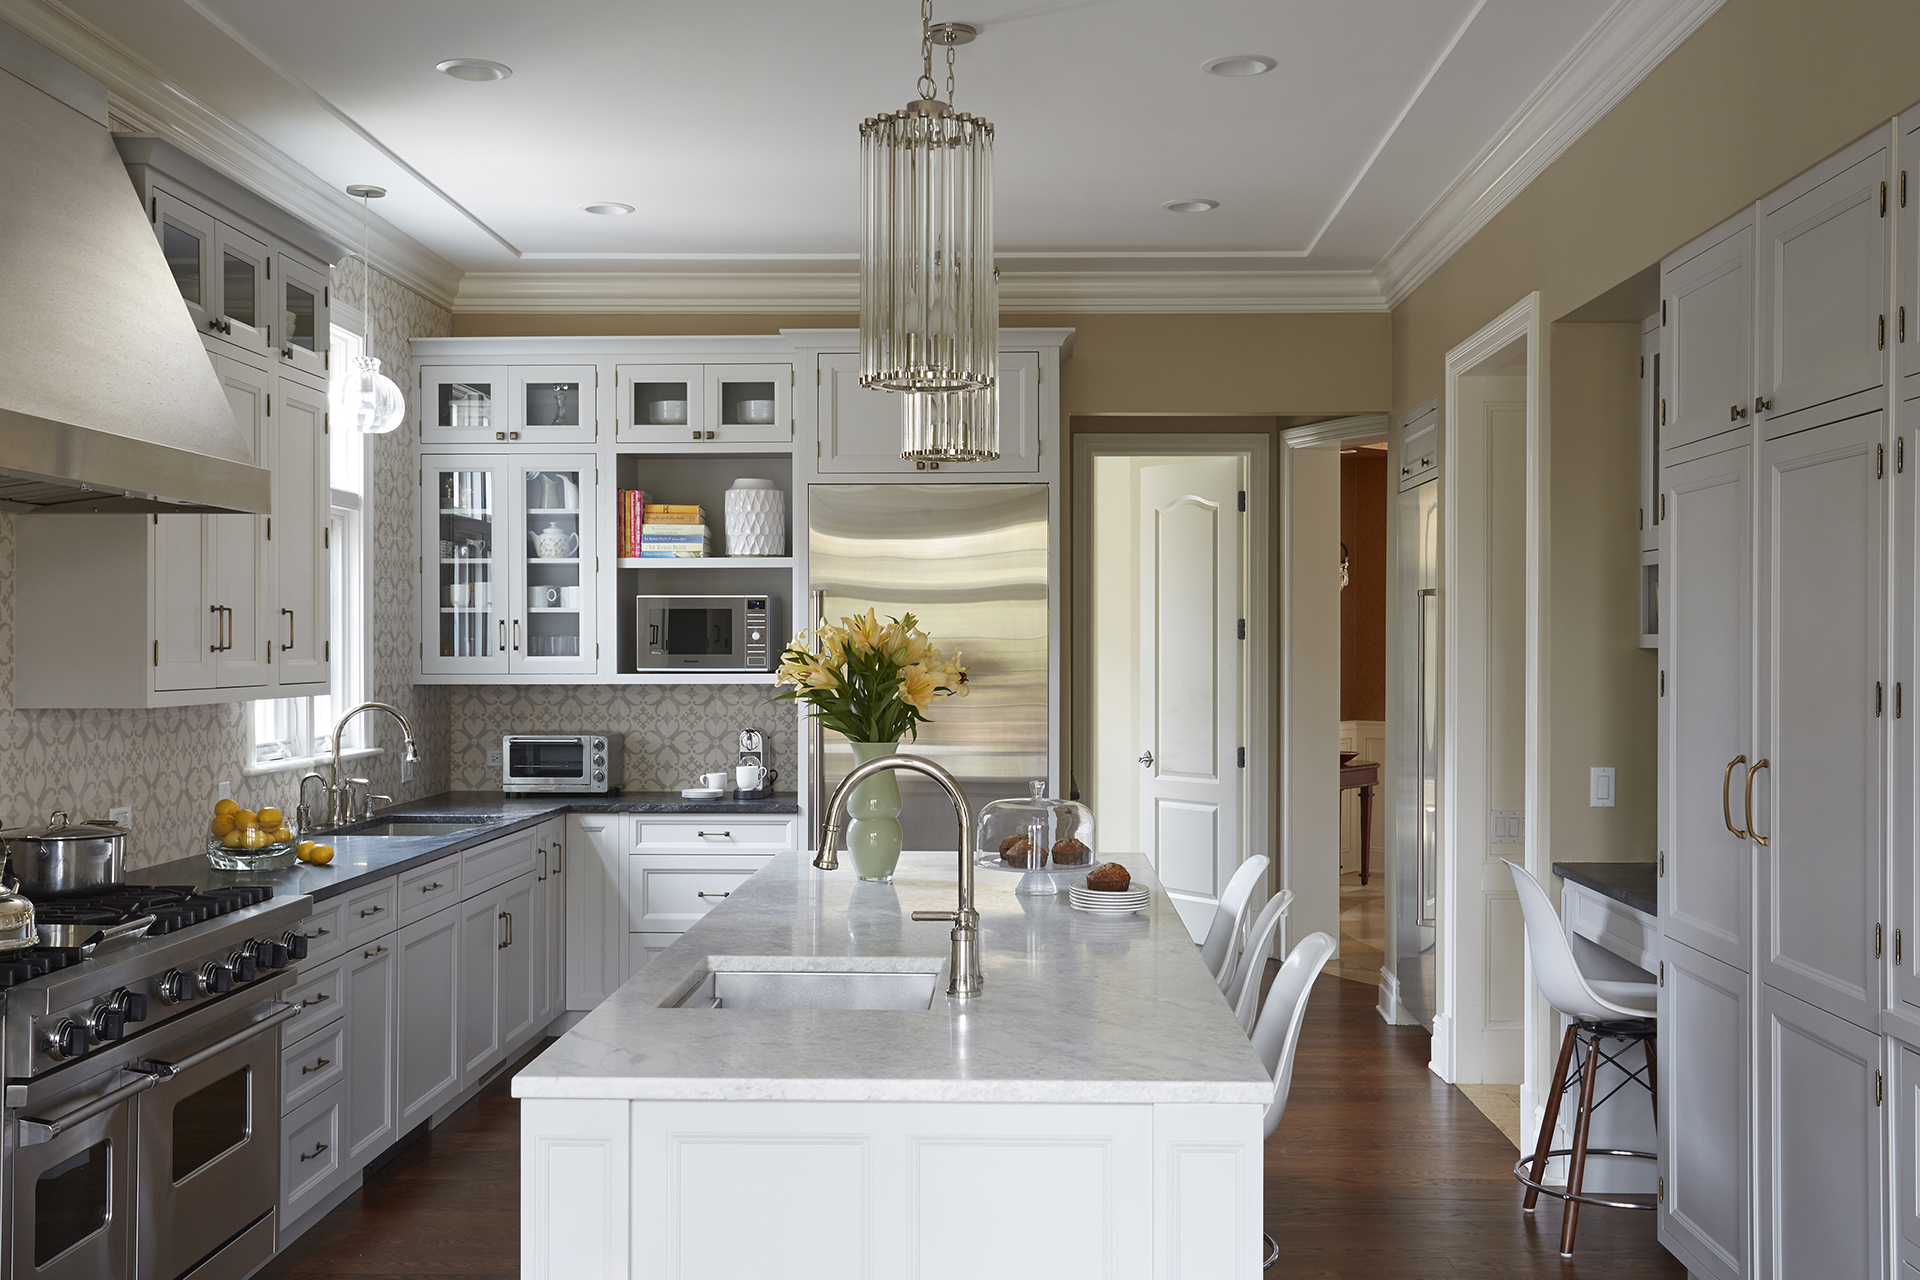 Luxury white kitchen furniture design with large island after remodeling in Winnetka